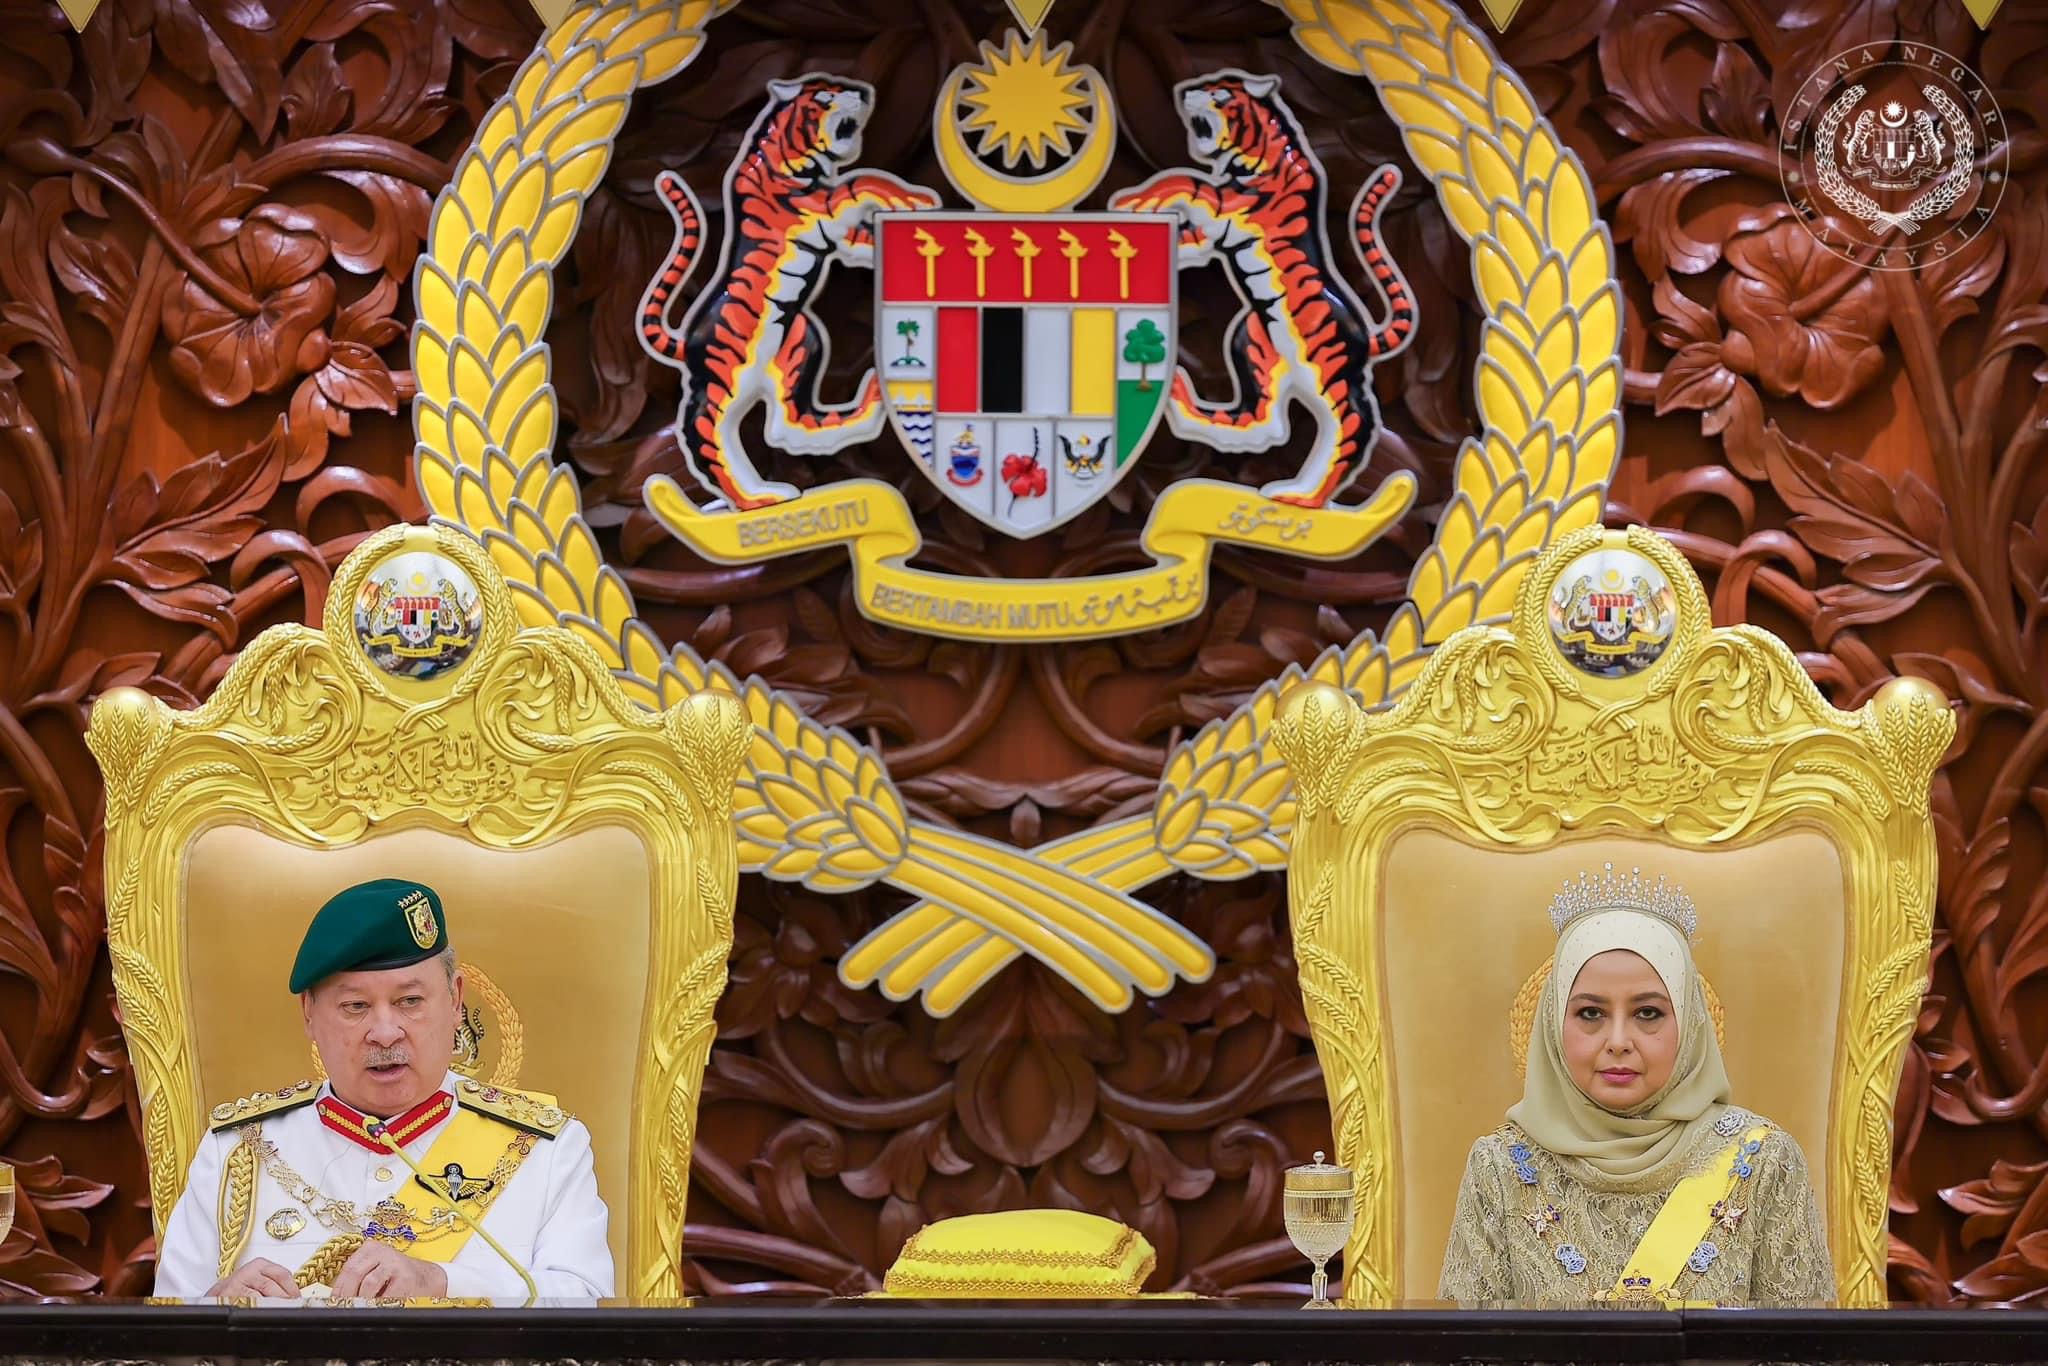 His majesty sultan ibrahim, king of malaysia and  her majesty raja zarith sofiah, queen of malaysia.